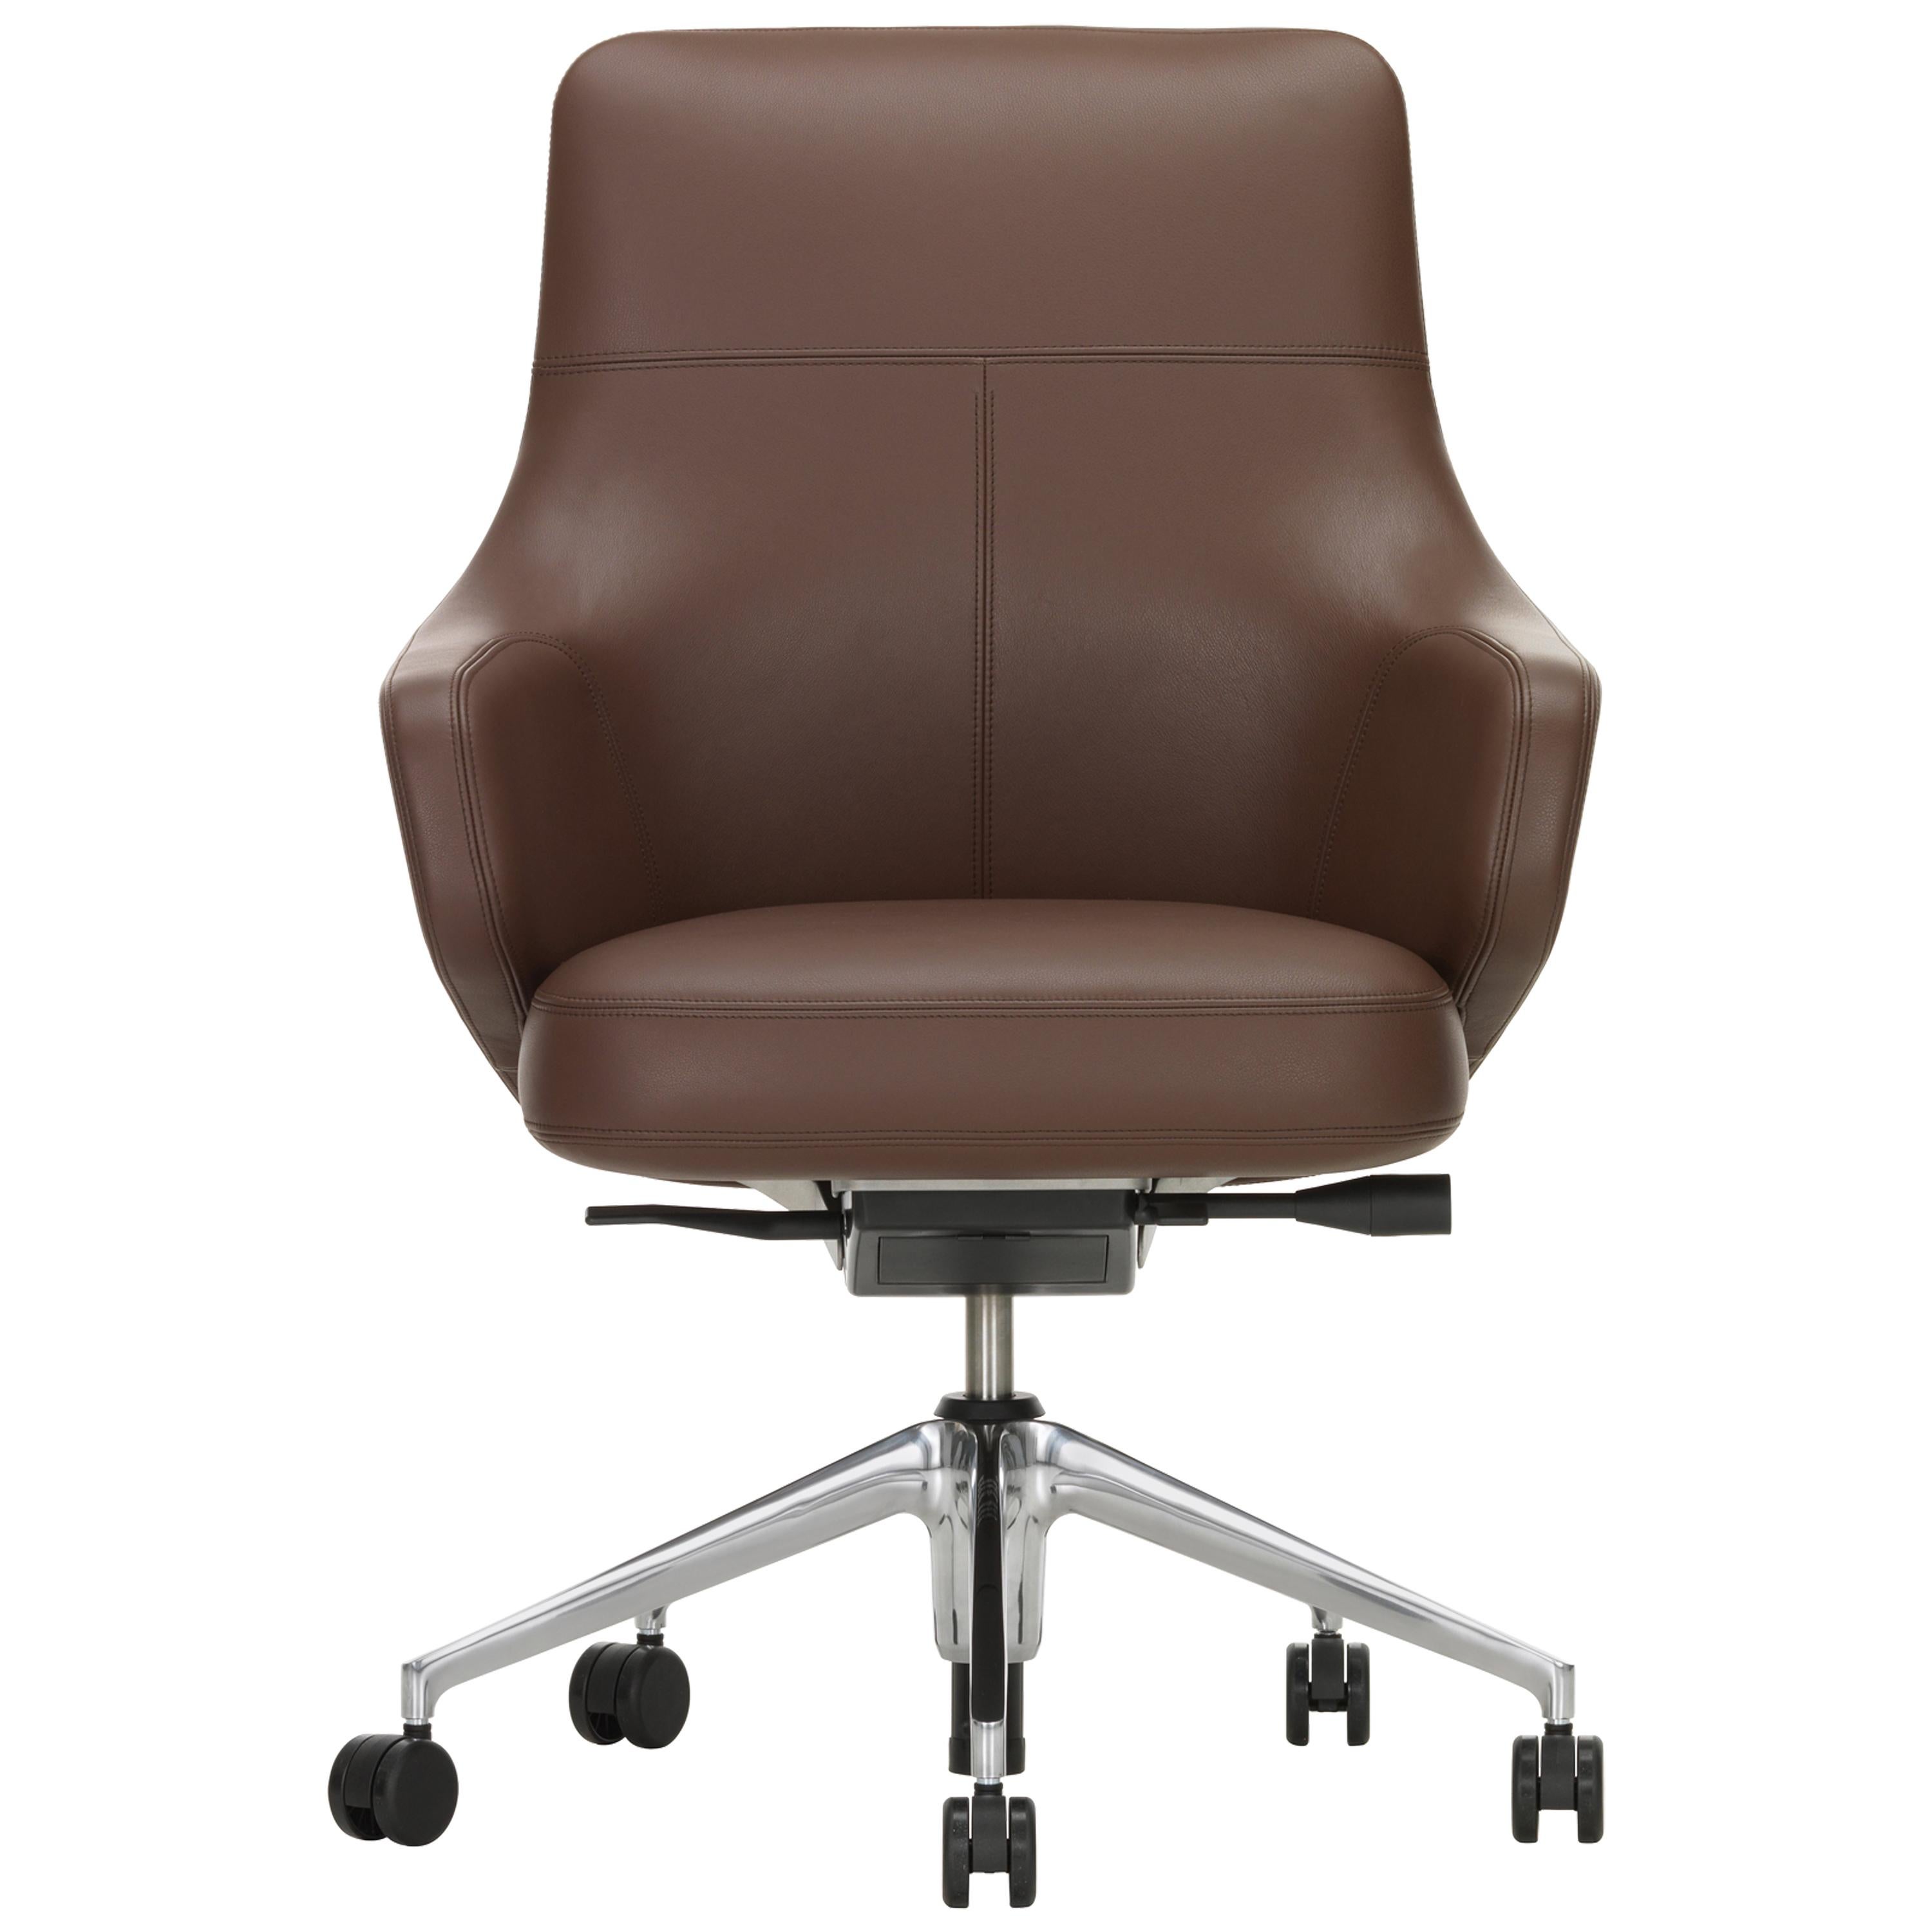 Vitra Grand Executive Lowback Chair in Maroon Leather by Antonio Citterio For Sale